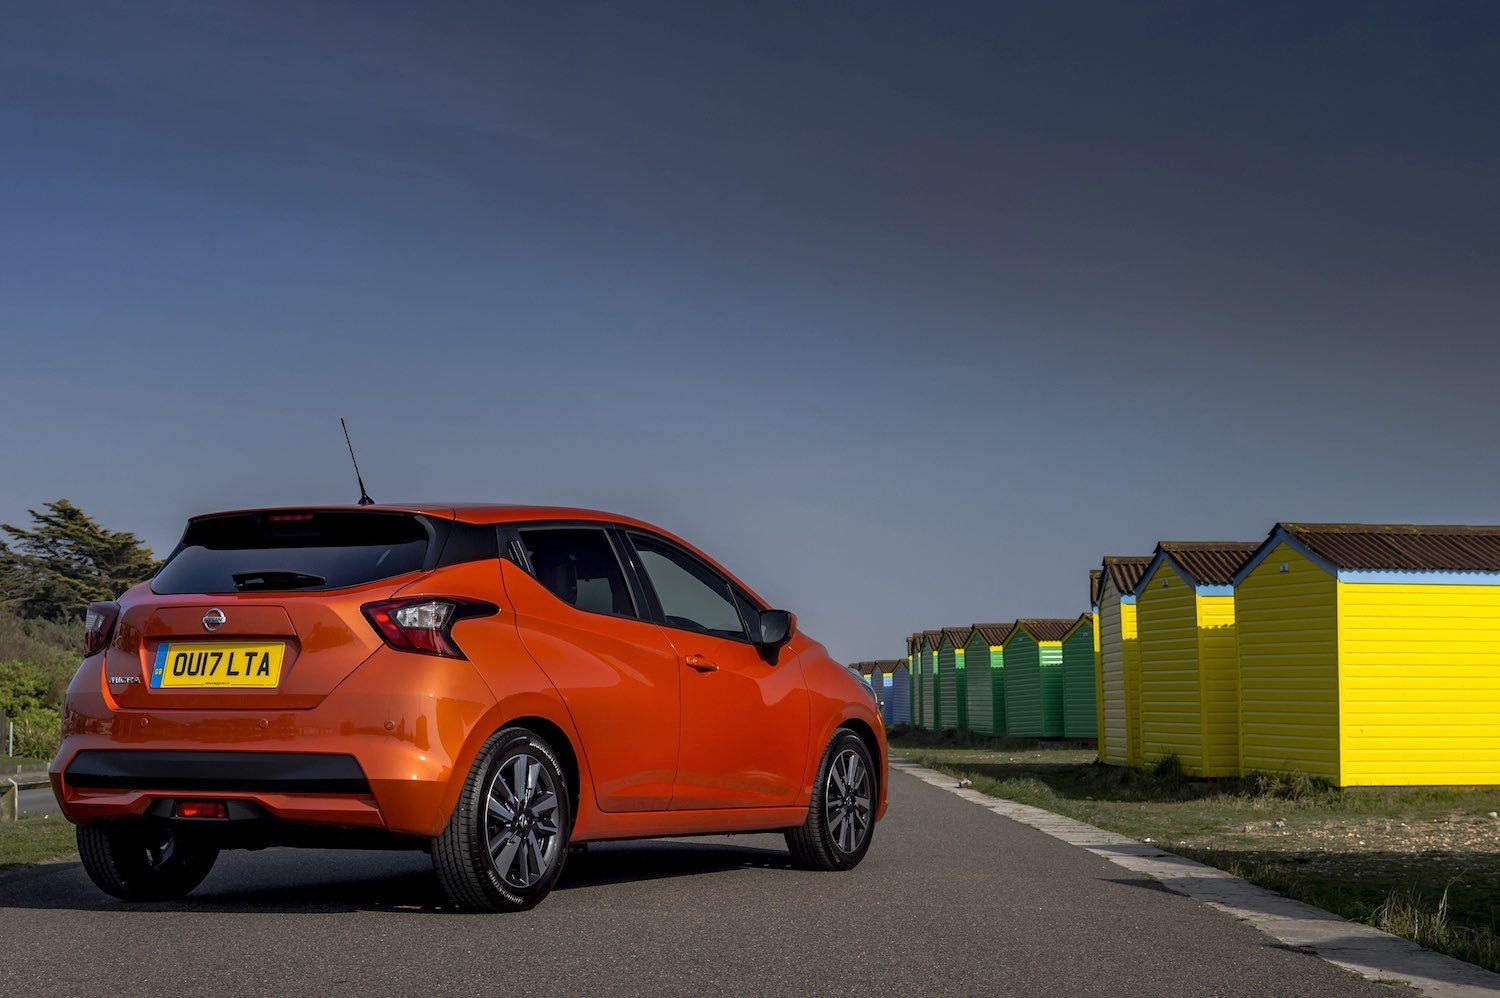 Tom Scanlan drives the All New Nissan Micra 4